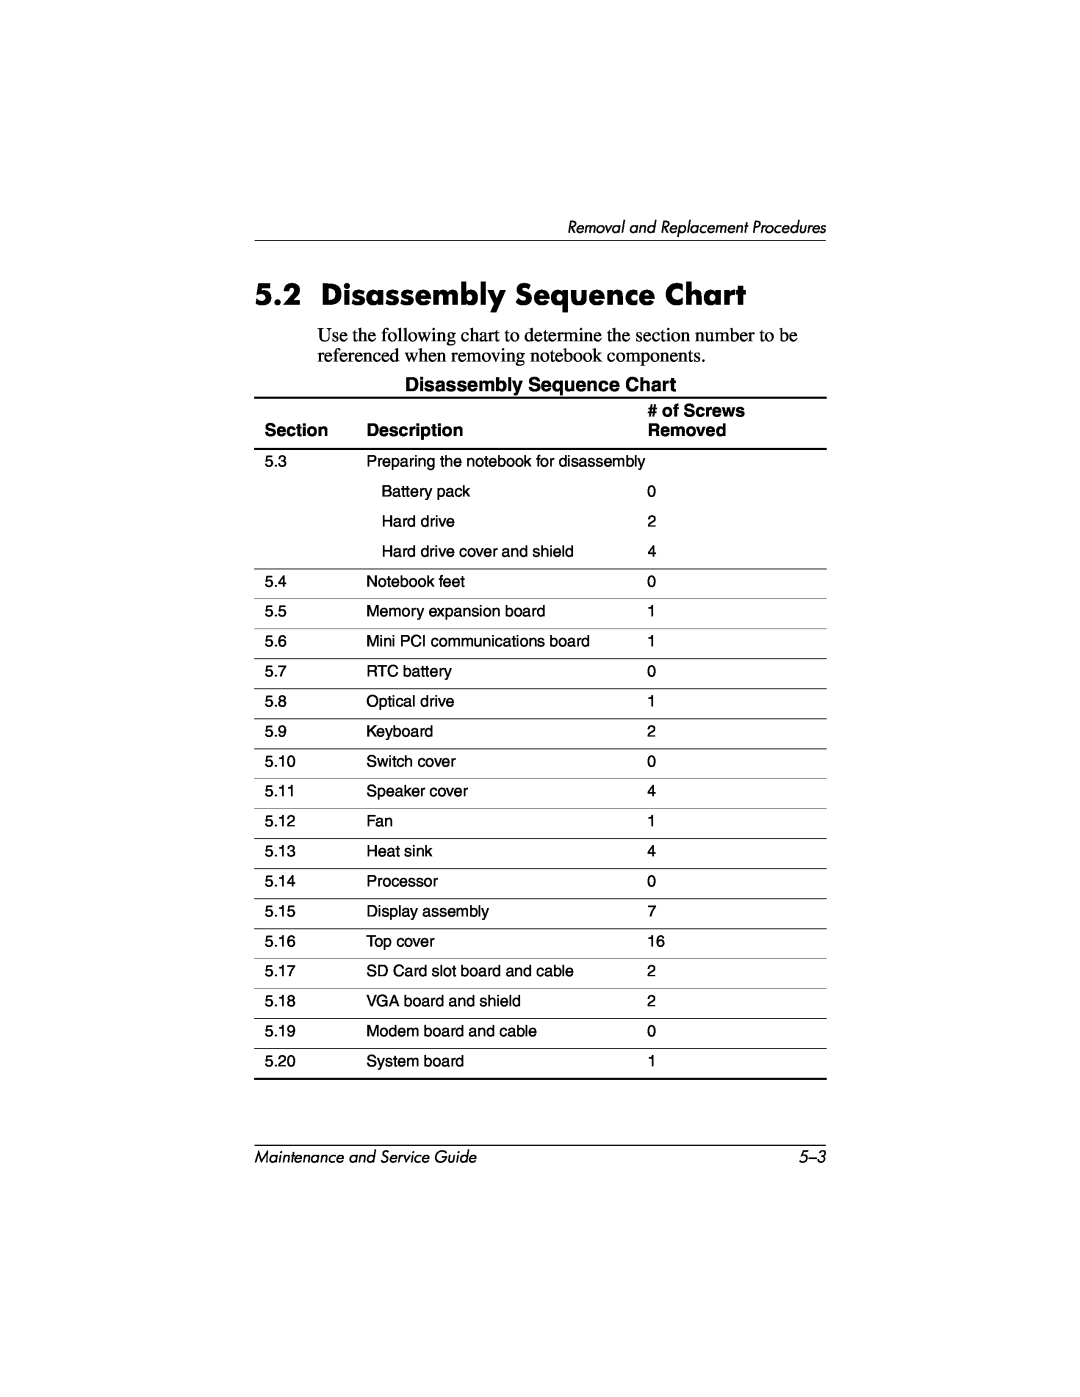 HP nx7000 manual Disassembly Sequence Chart, # of Screws, Section, Description, Removed, Removal and Replacement Procedures 